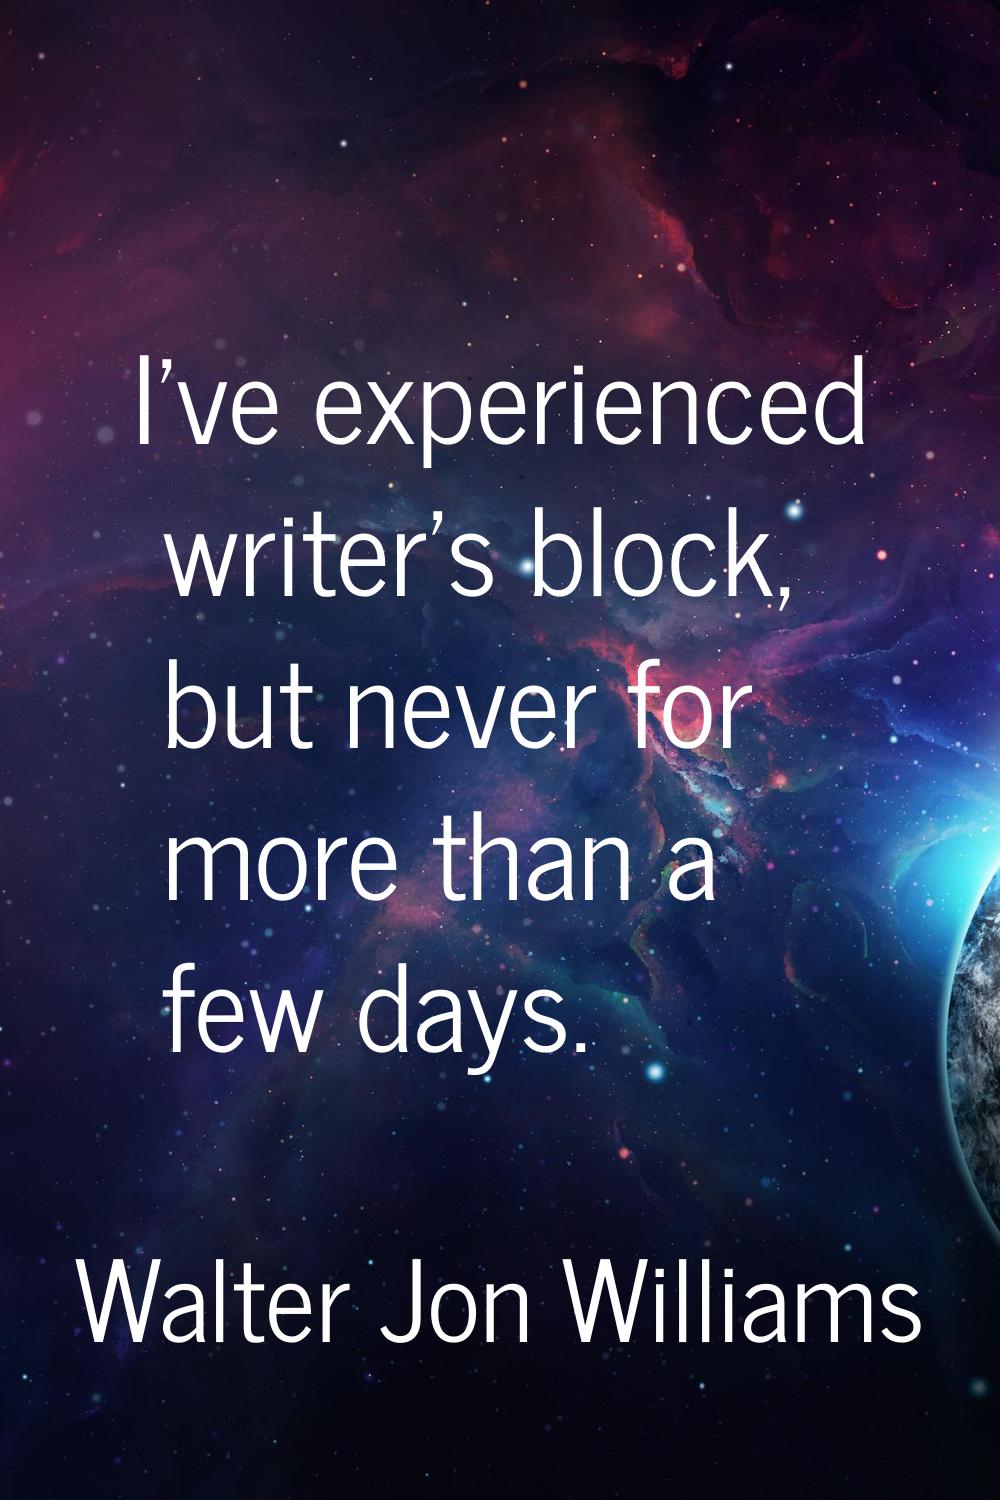 I've experienced writer's block, but never for more than a few days.